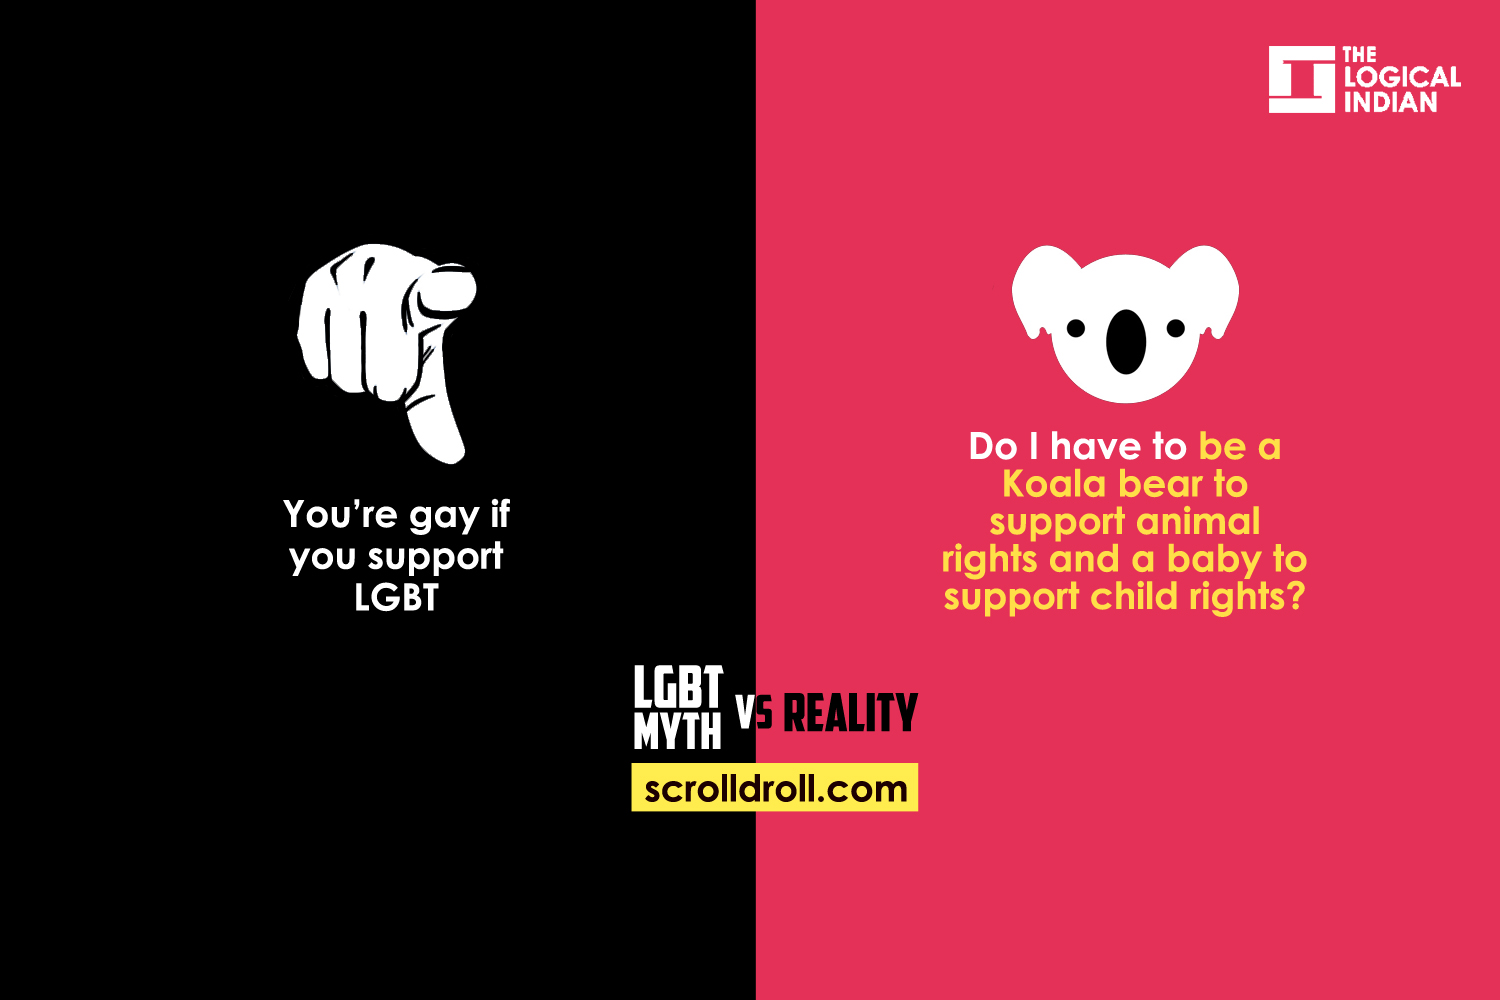 supporting homosexuality does not makes you gay